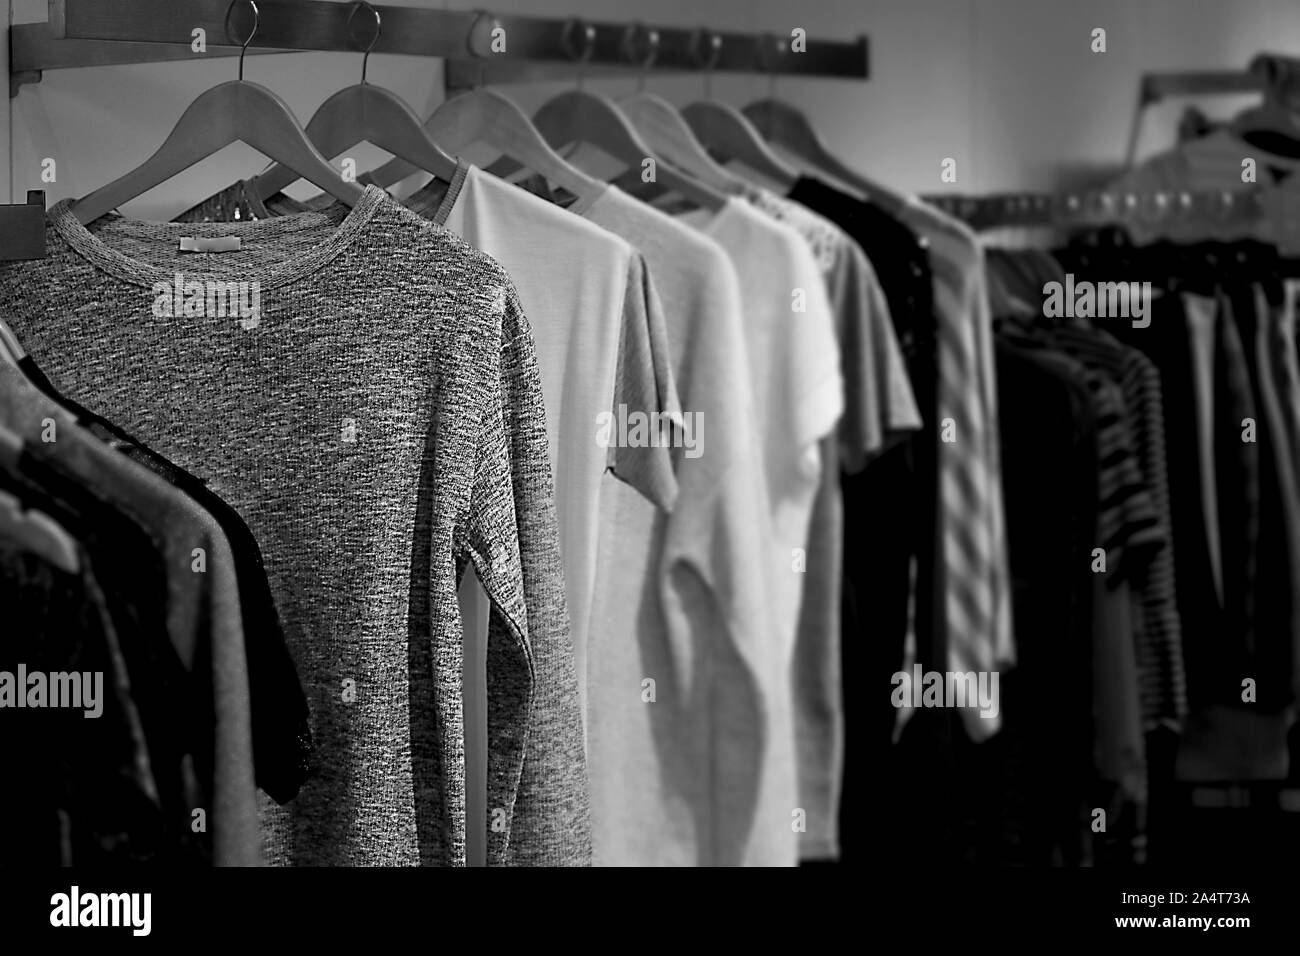 Black and white photo of the show room with regals full of trendy boy clothes Stock Photo